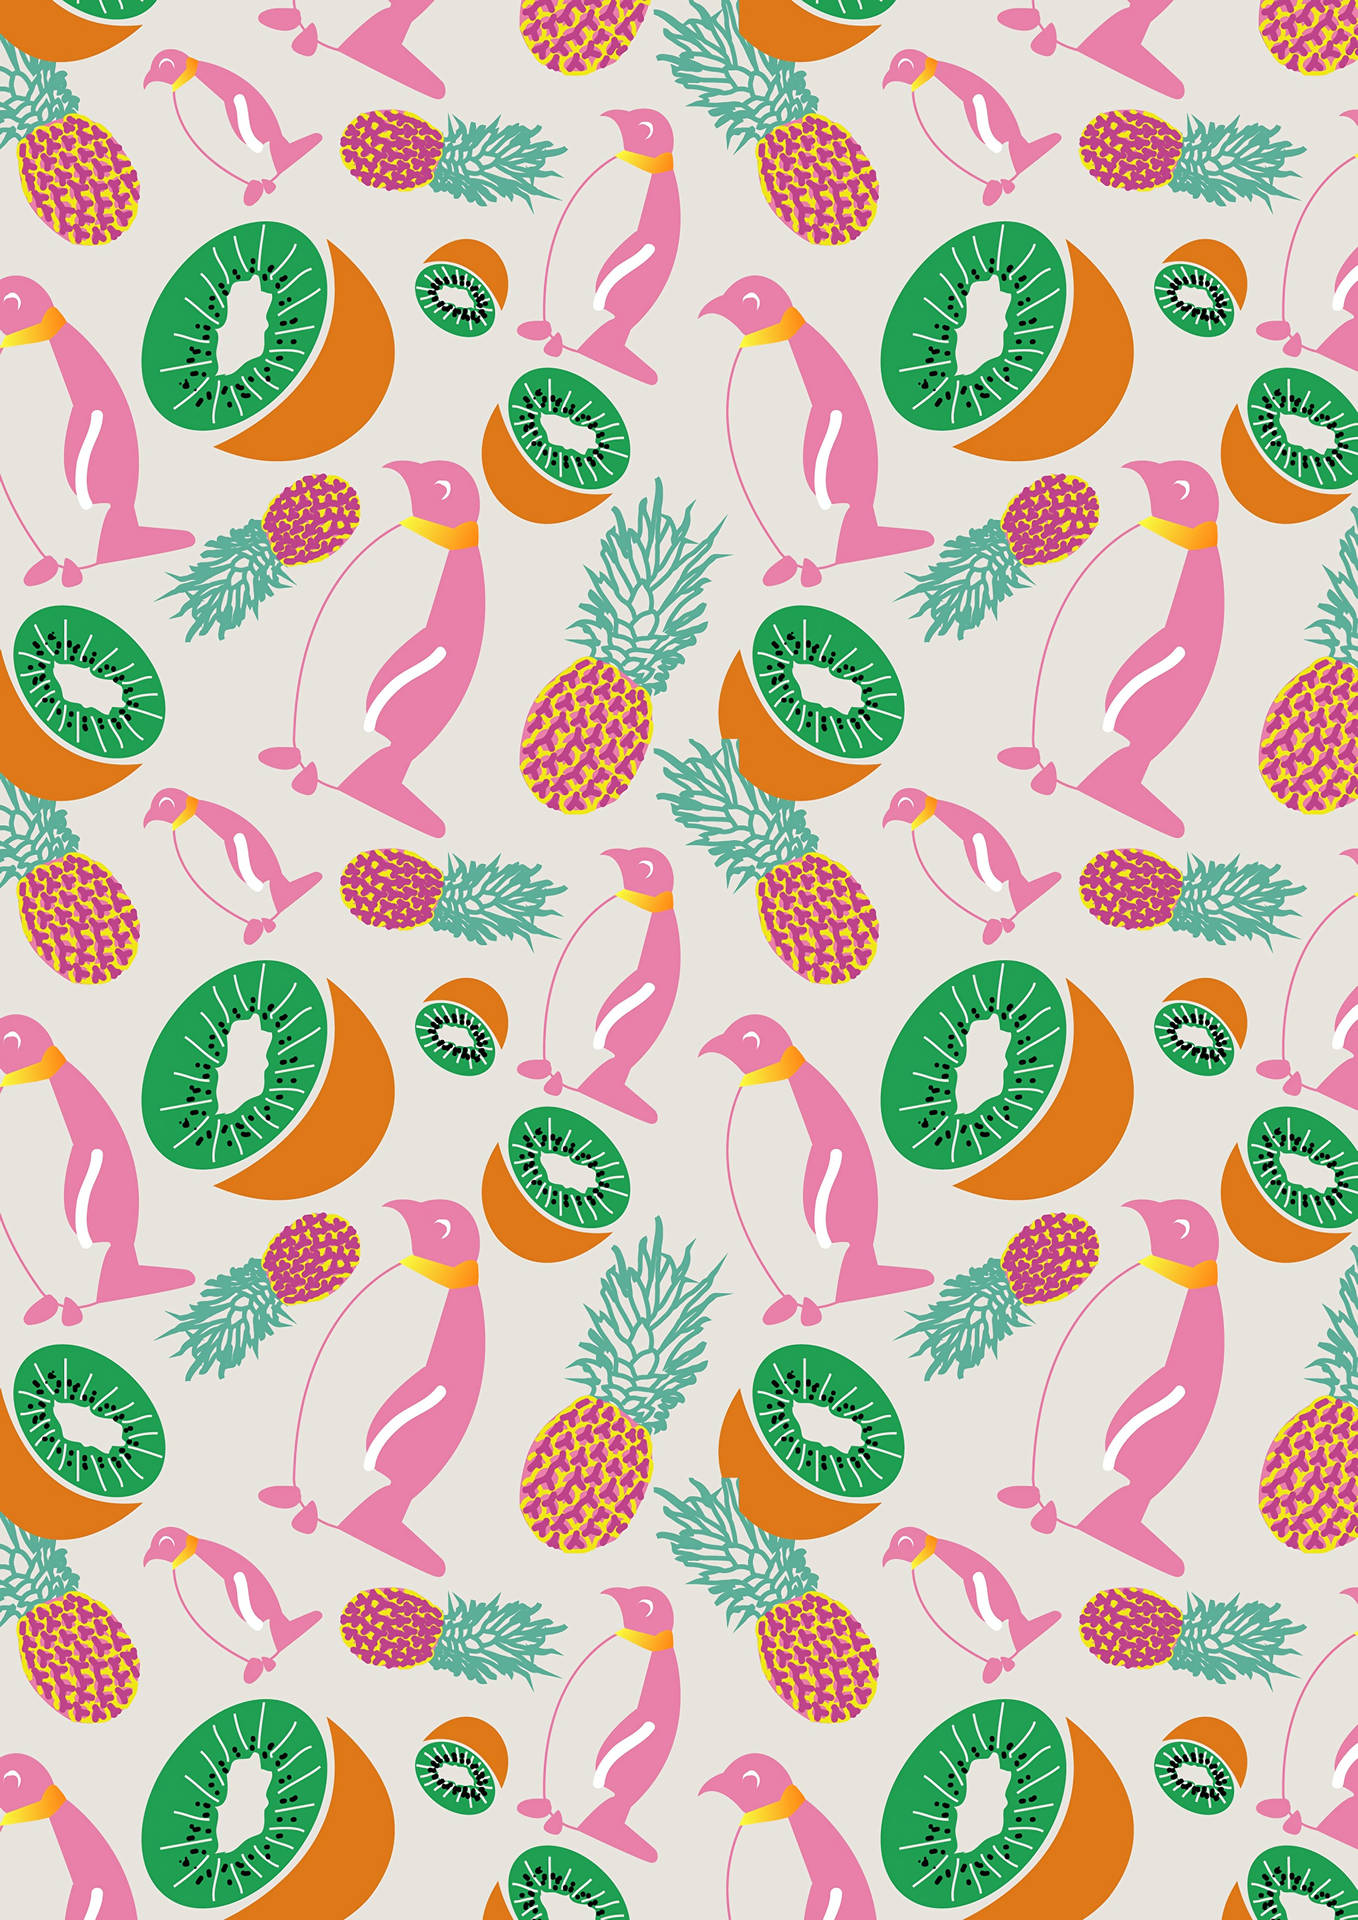 Pineapples And Penguins Artwork Background